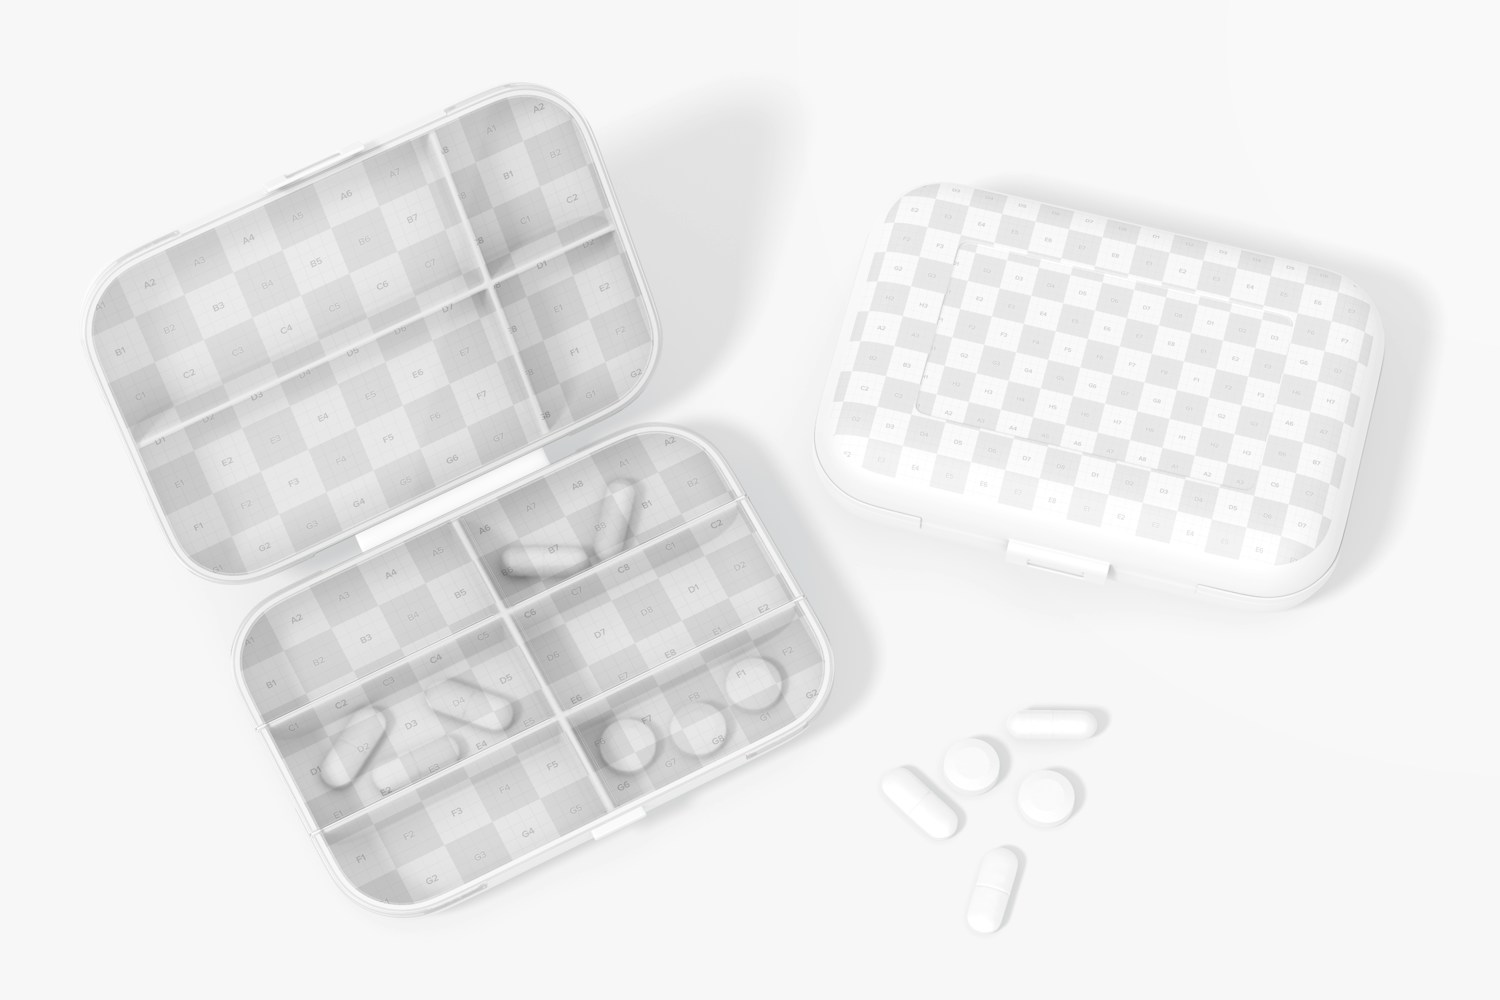 Double Sided Pill Boxes Mockup, Opened and Closed